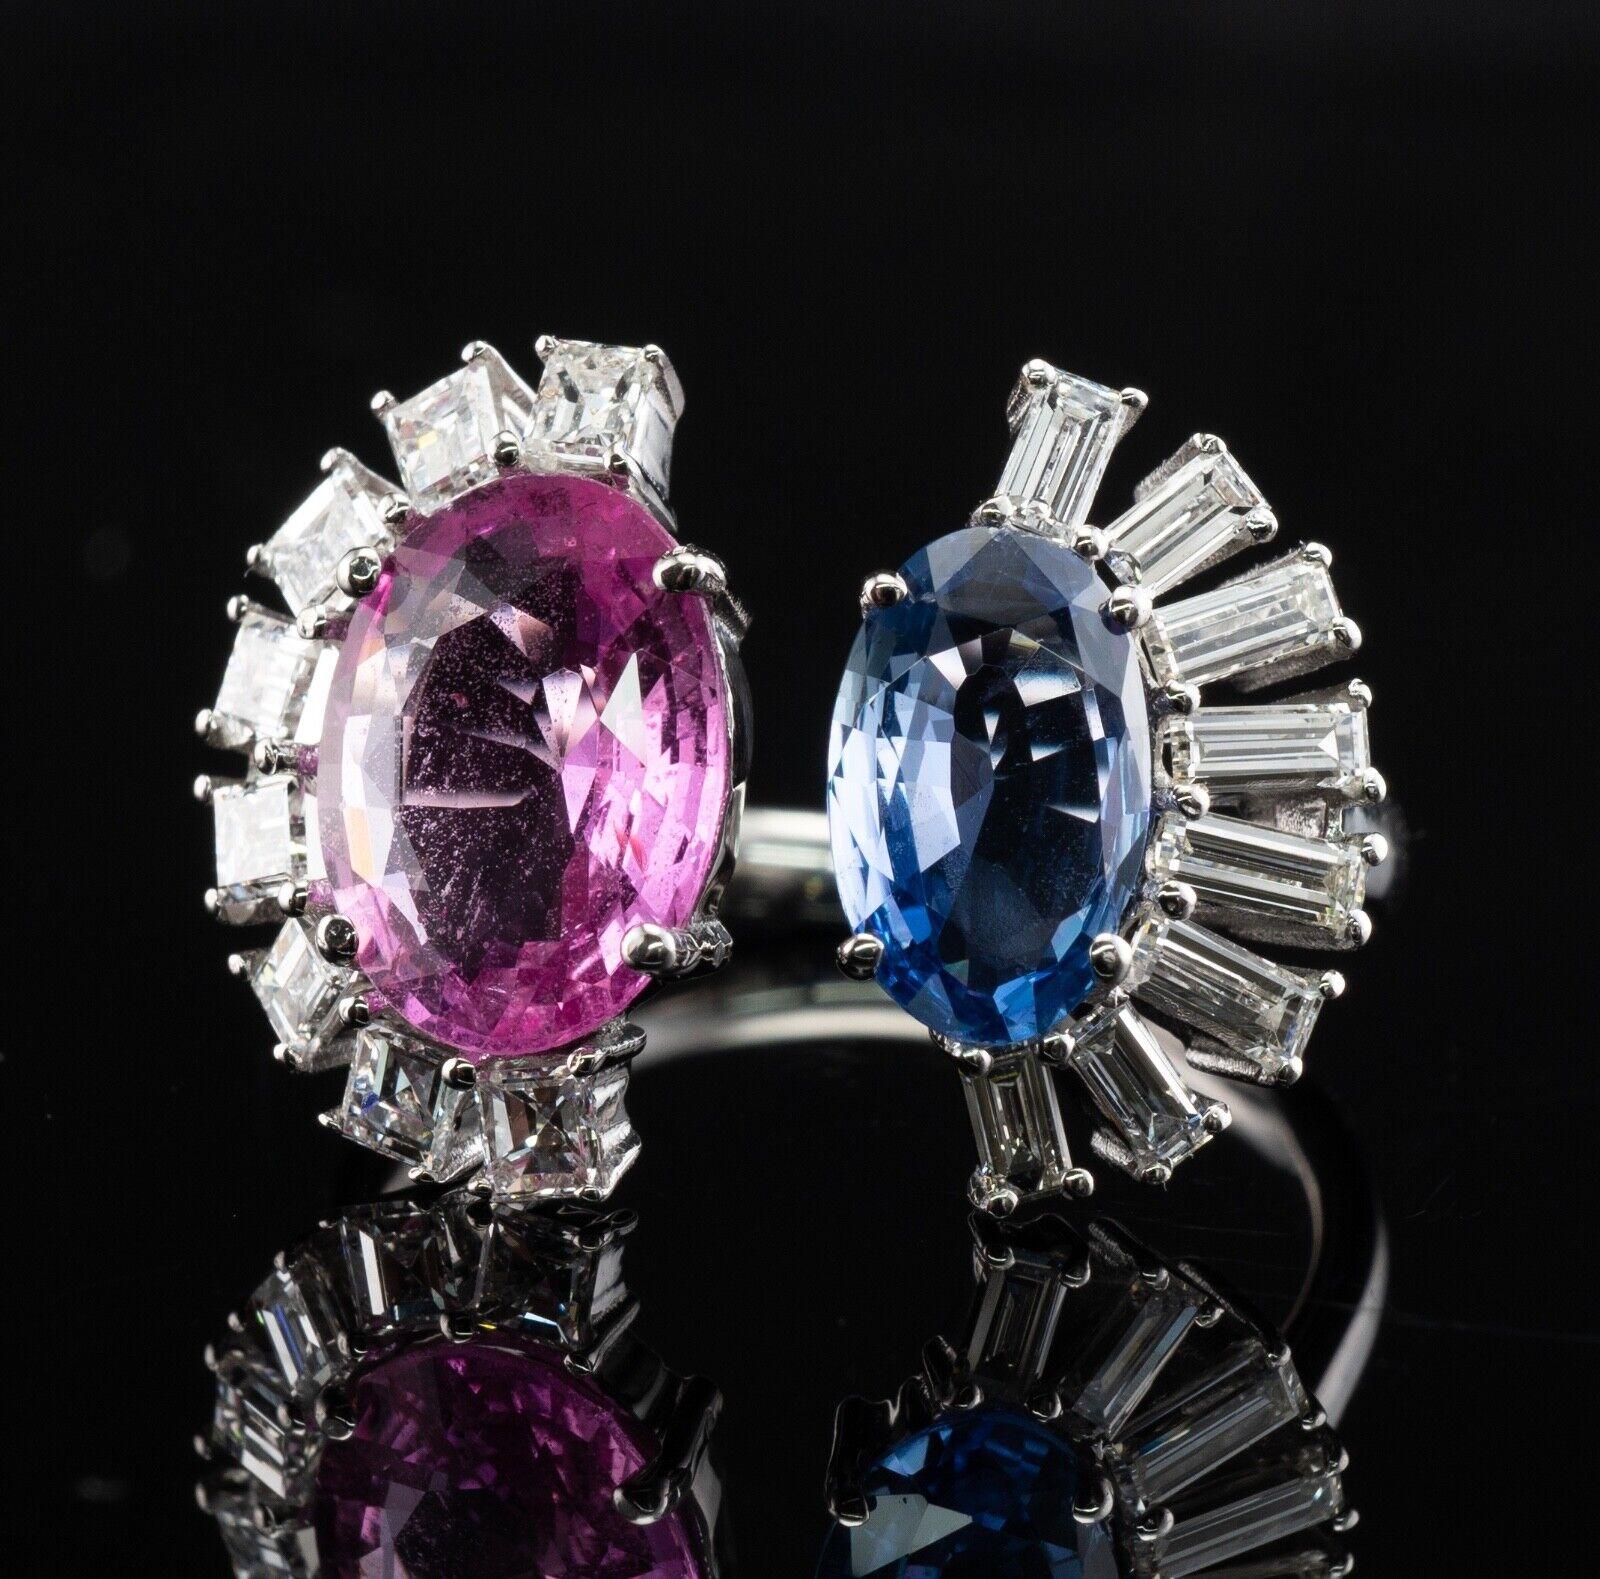 This unusual estate ring is finely crafted in solid 18K White Gold.
Natural Earth mined Pink Sapphire measures 10x8mm (3.15 carats).
Oval blue Sapphire measures 9x5mm (1.80 carats). 
8 square cut and 8 diamond baguettes total 1.24 carats of VS1-VS2